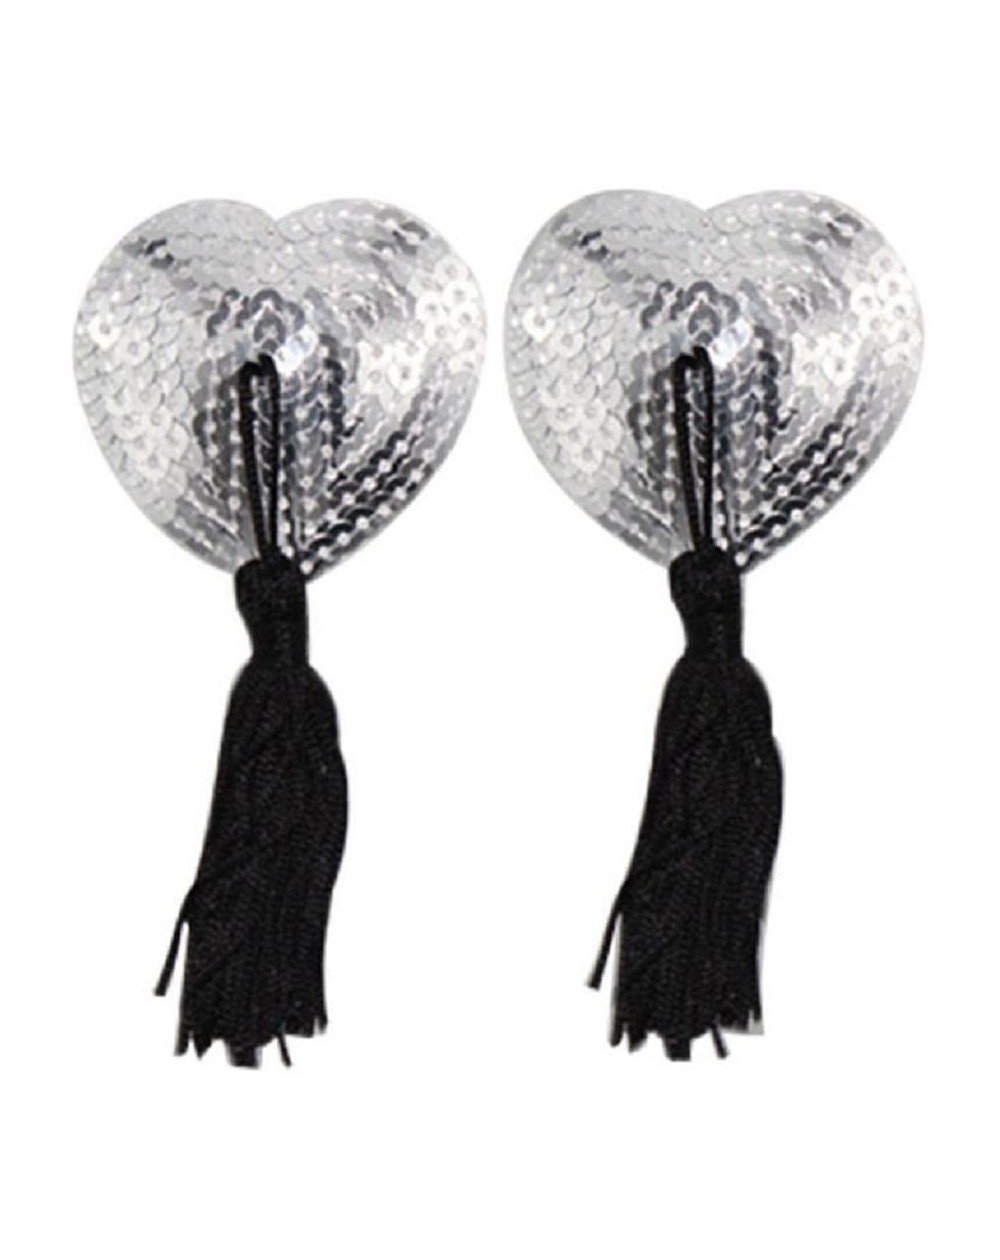 Adult Novelty Sexy Sequin Tassel Breast Pasties Various Colors for Wedding/Valentine/Special Ocassion (Silver) - Silver - CB1...